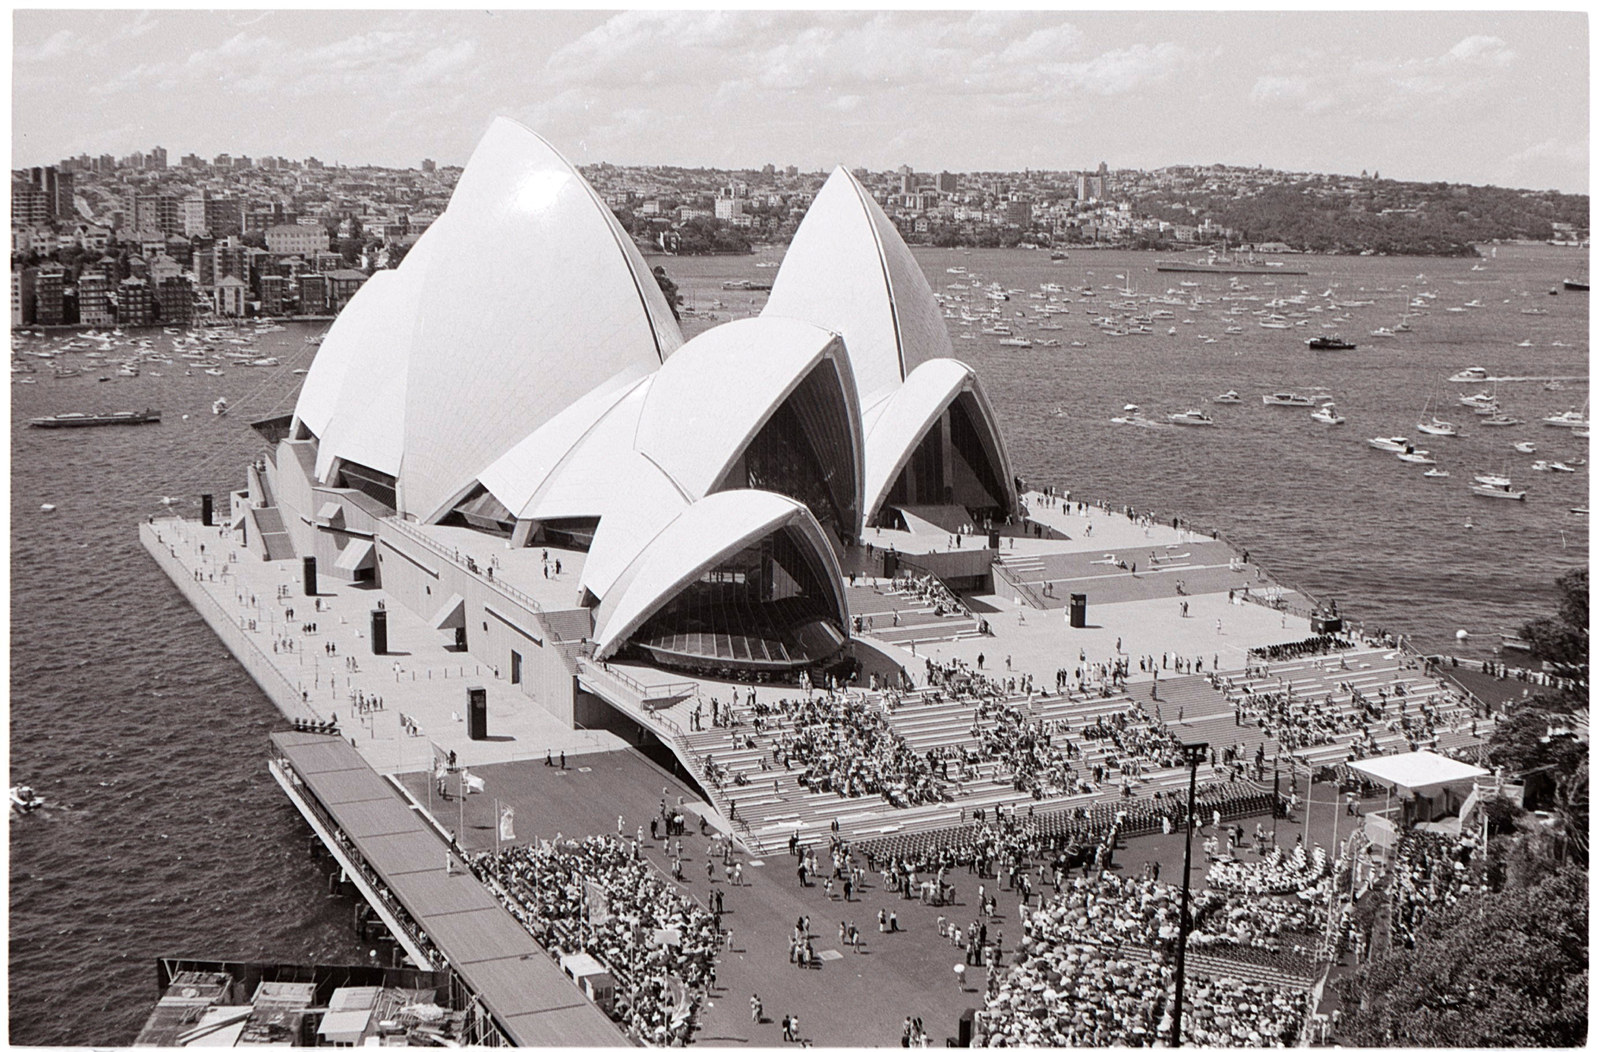 Crowds begin to take their place before the arrival of HM the Queen to open the Sydney Opera House, October 20, 1973